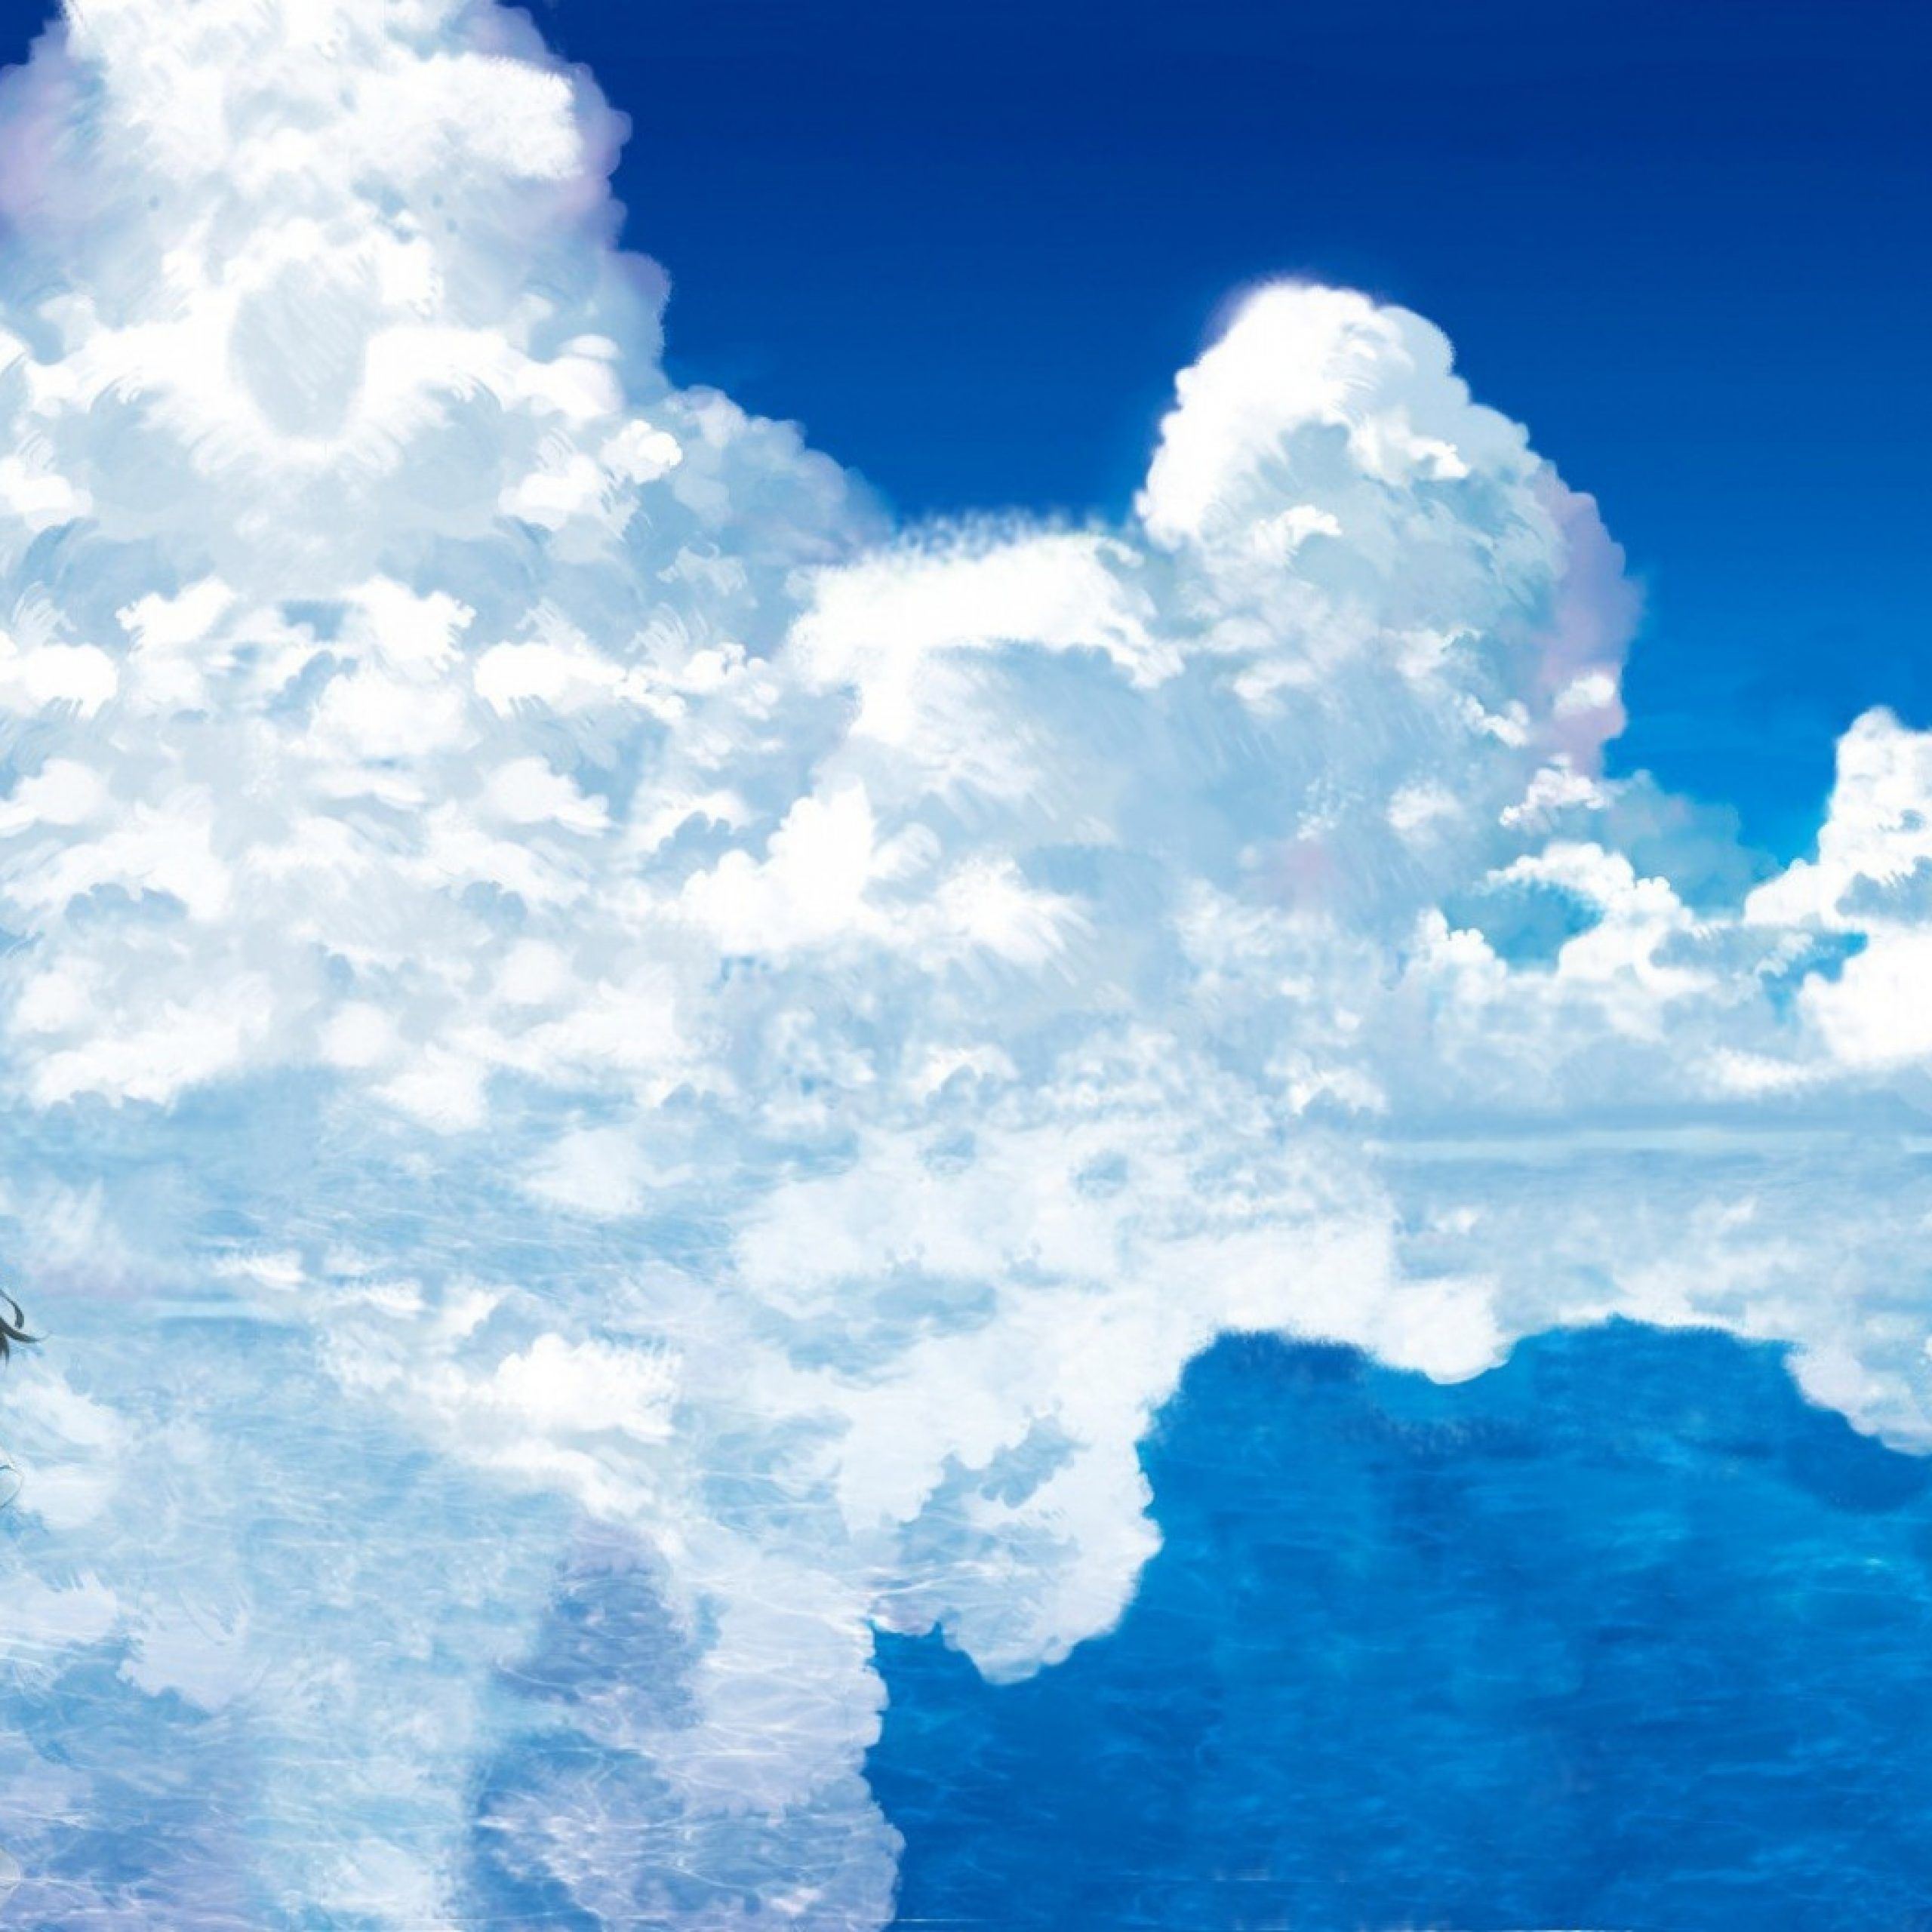 clouds, dual screen, trees, reflection, sky, anime, dual monitor